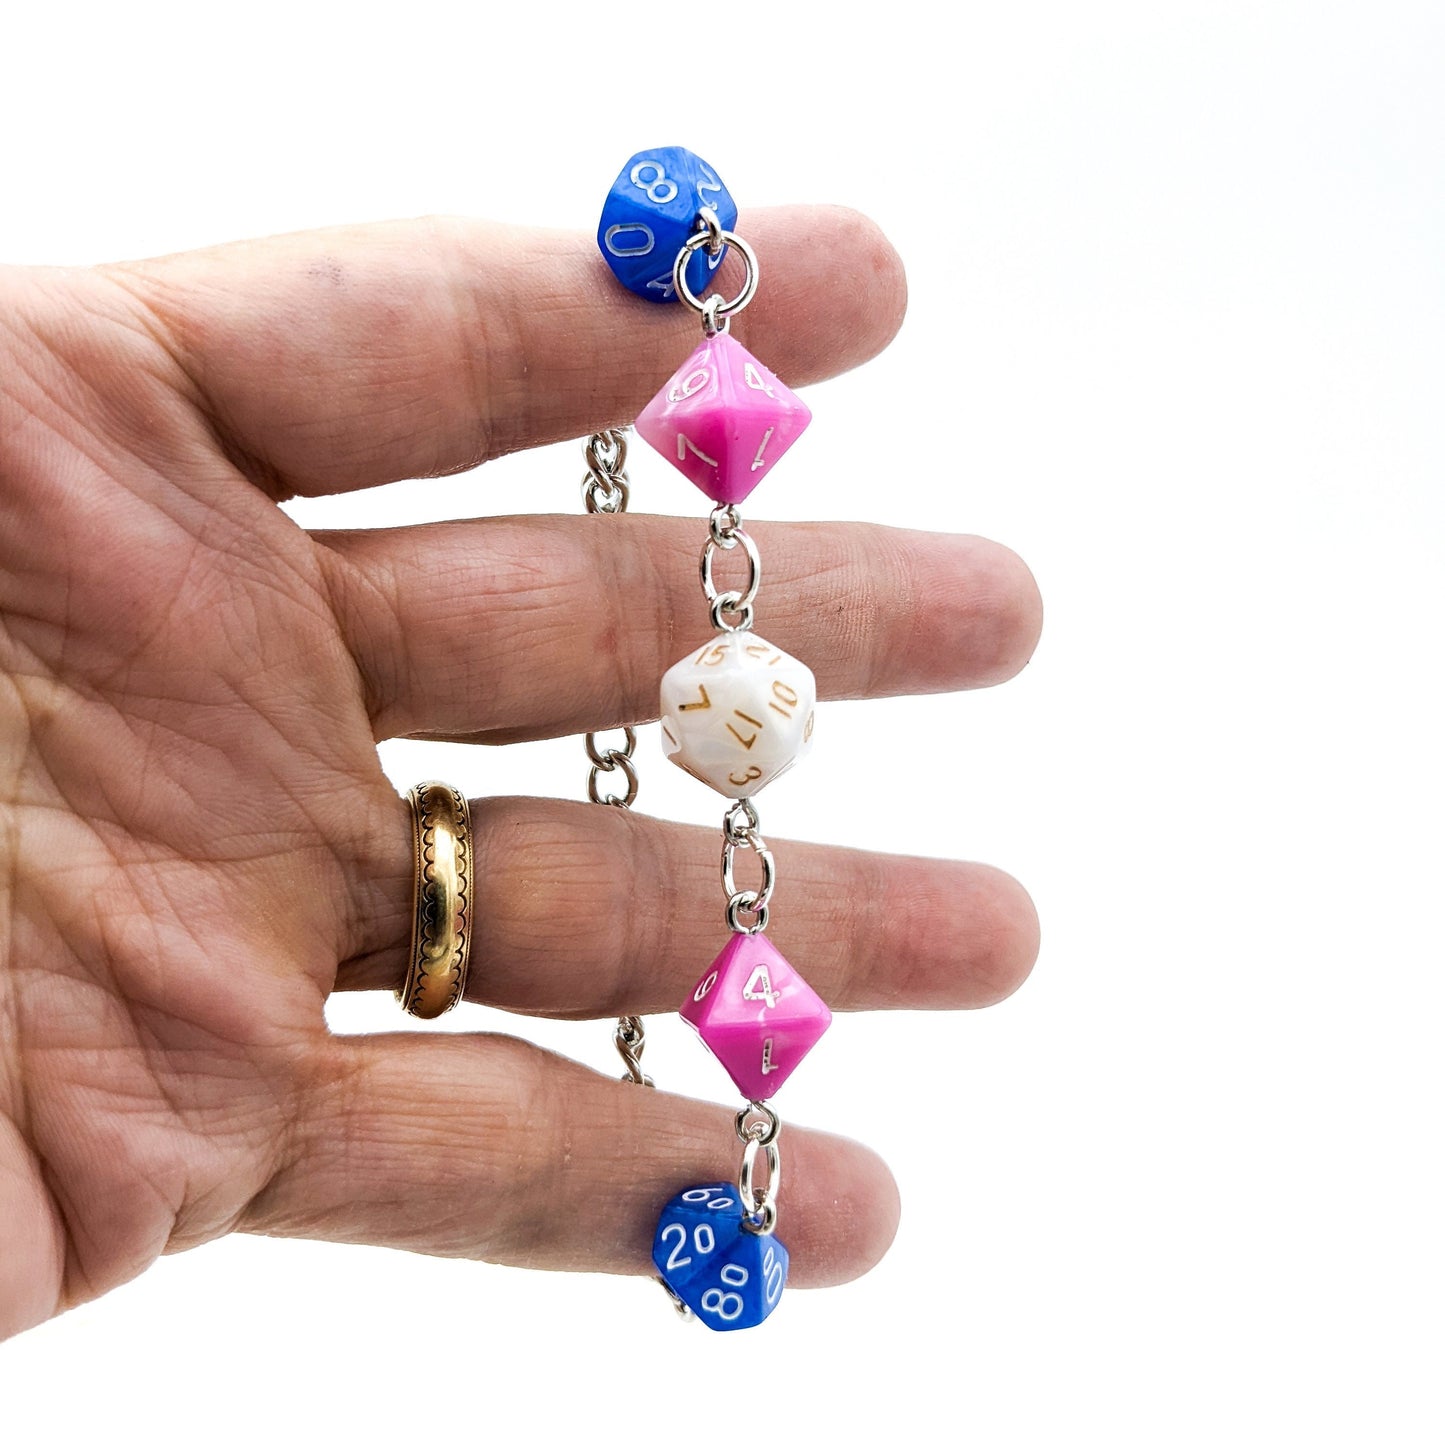 Trans Pride Dice Bracelet with Real Polyhedral Dice